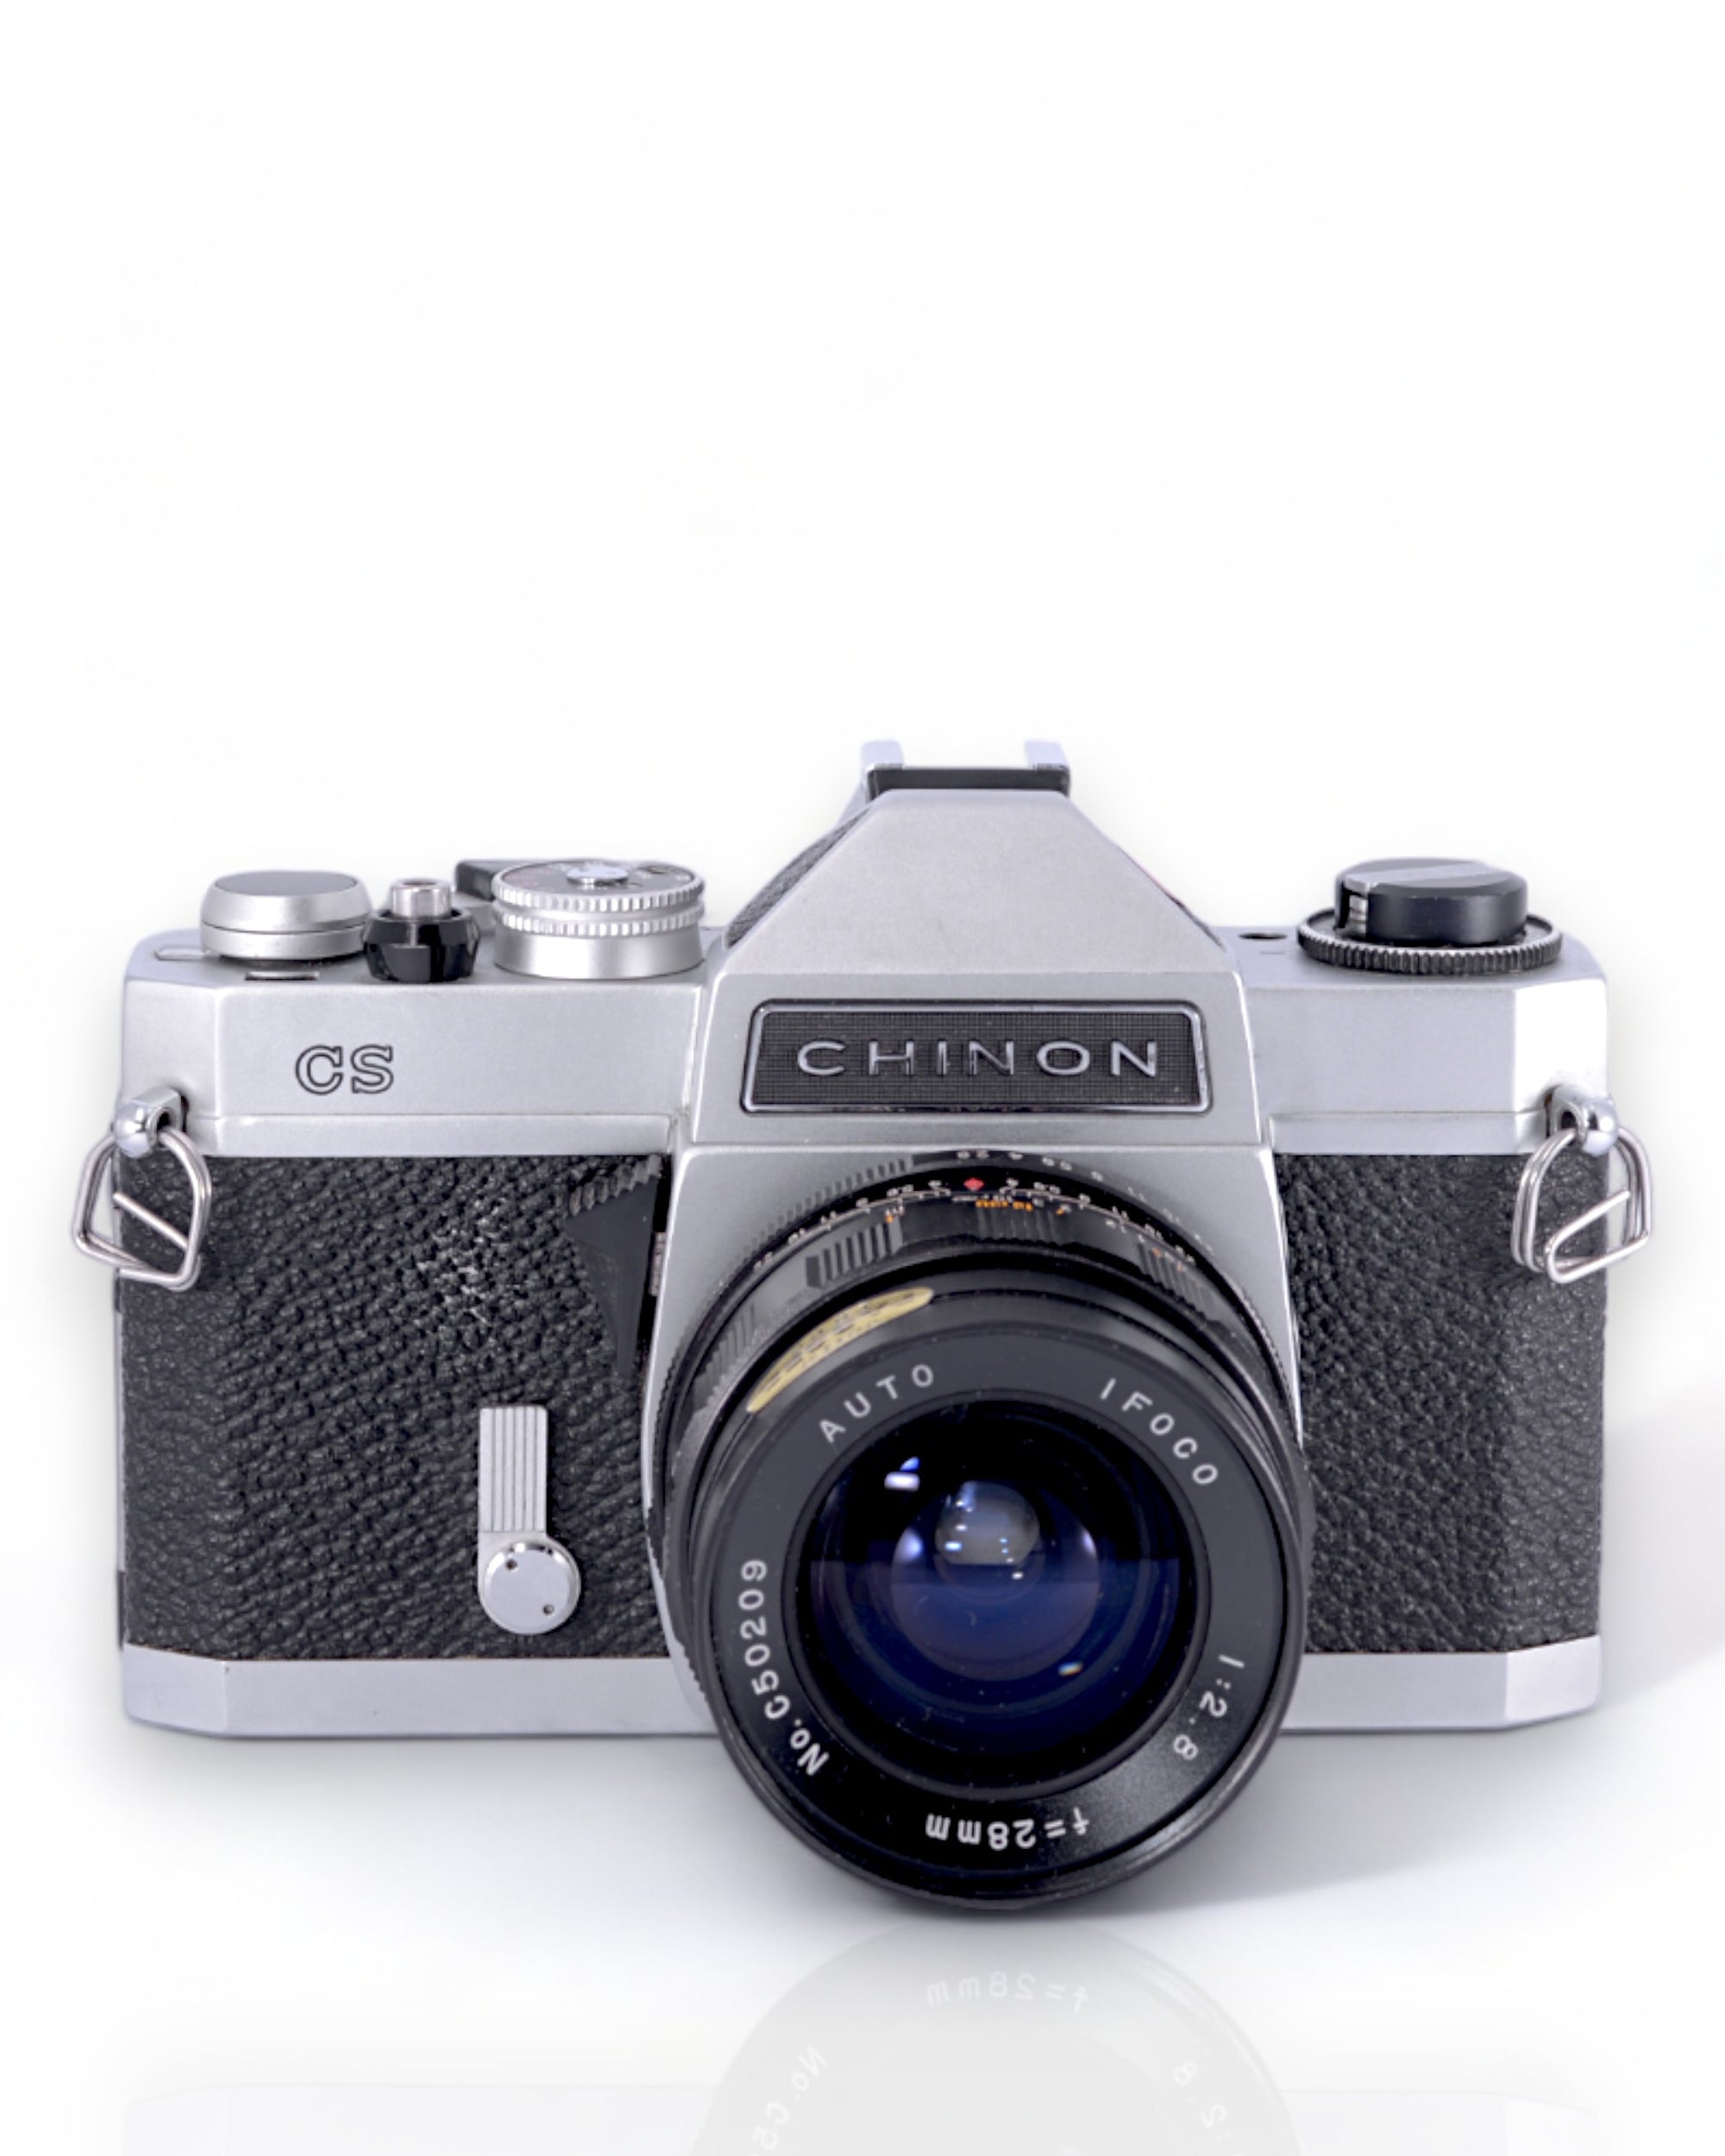 Chinon CS 35mm film camera with 28mm lens